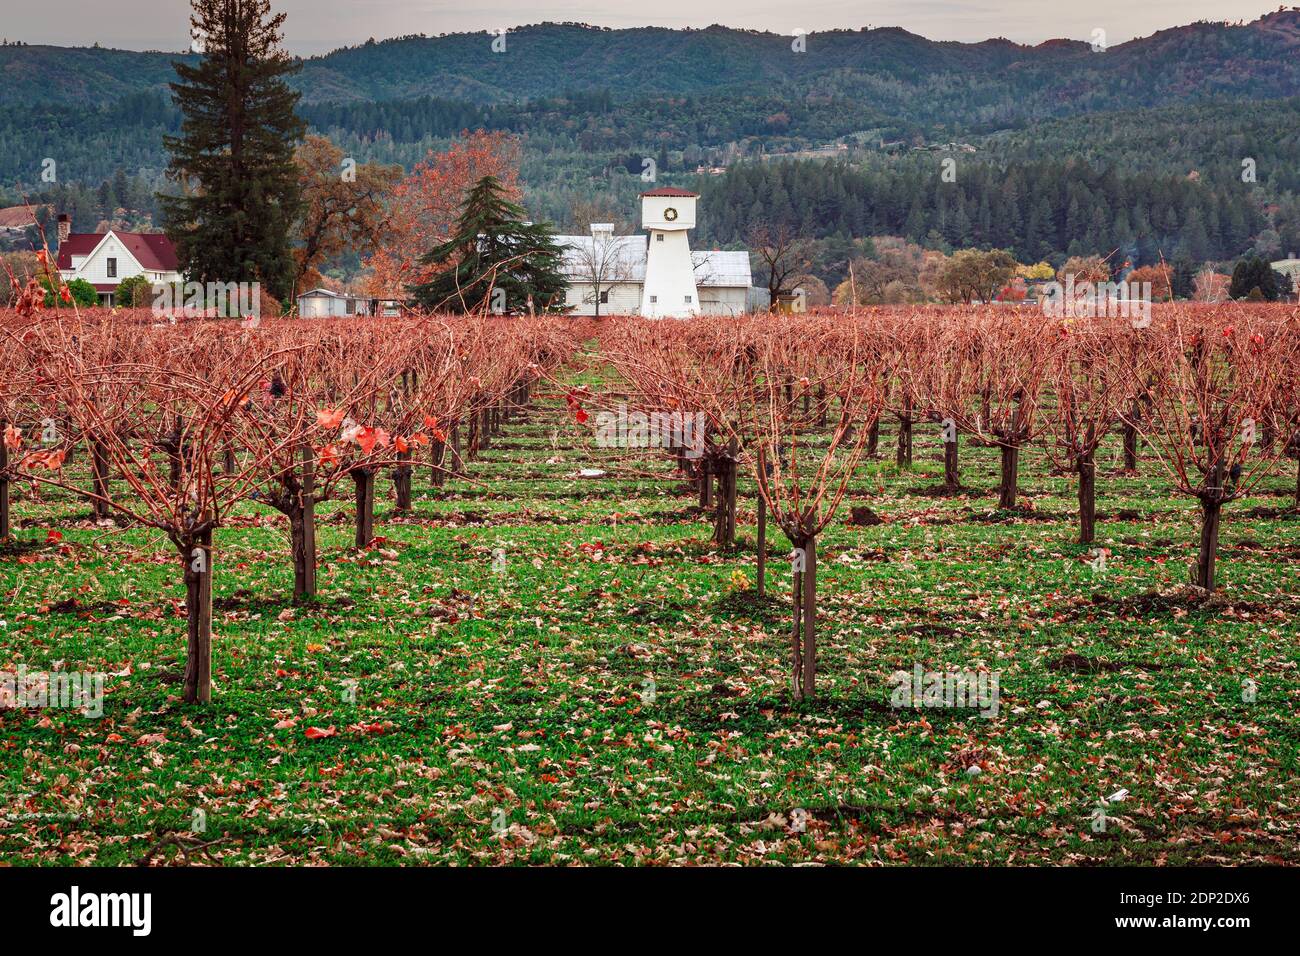 A picturesque Napa Valley Vineyard re-energizing for the winter. A tranquil scene in a calm rest. Stock Photo